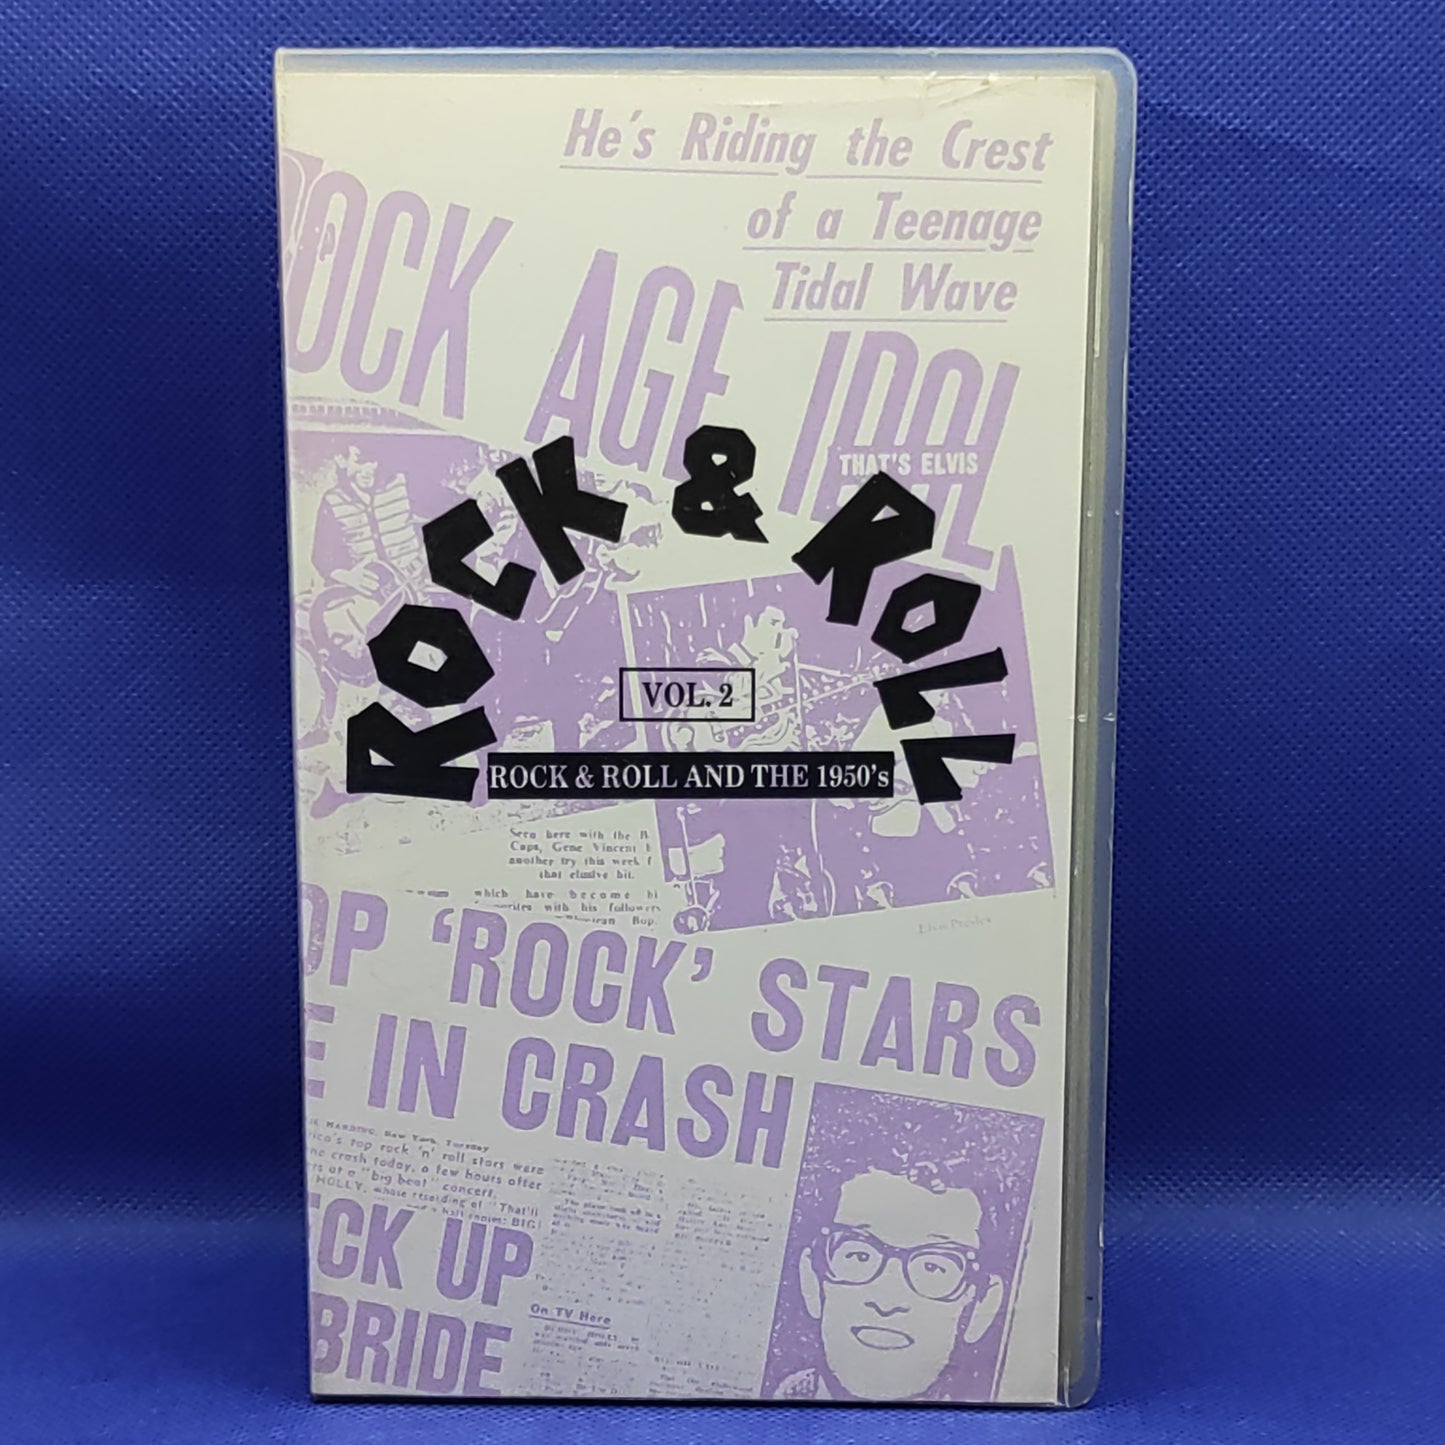 Rock & Roll vol2 - rock & roll and the 1950's